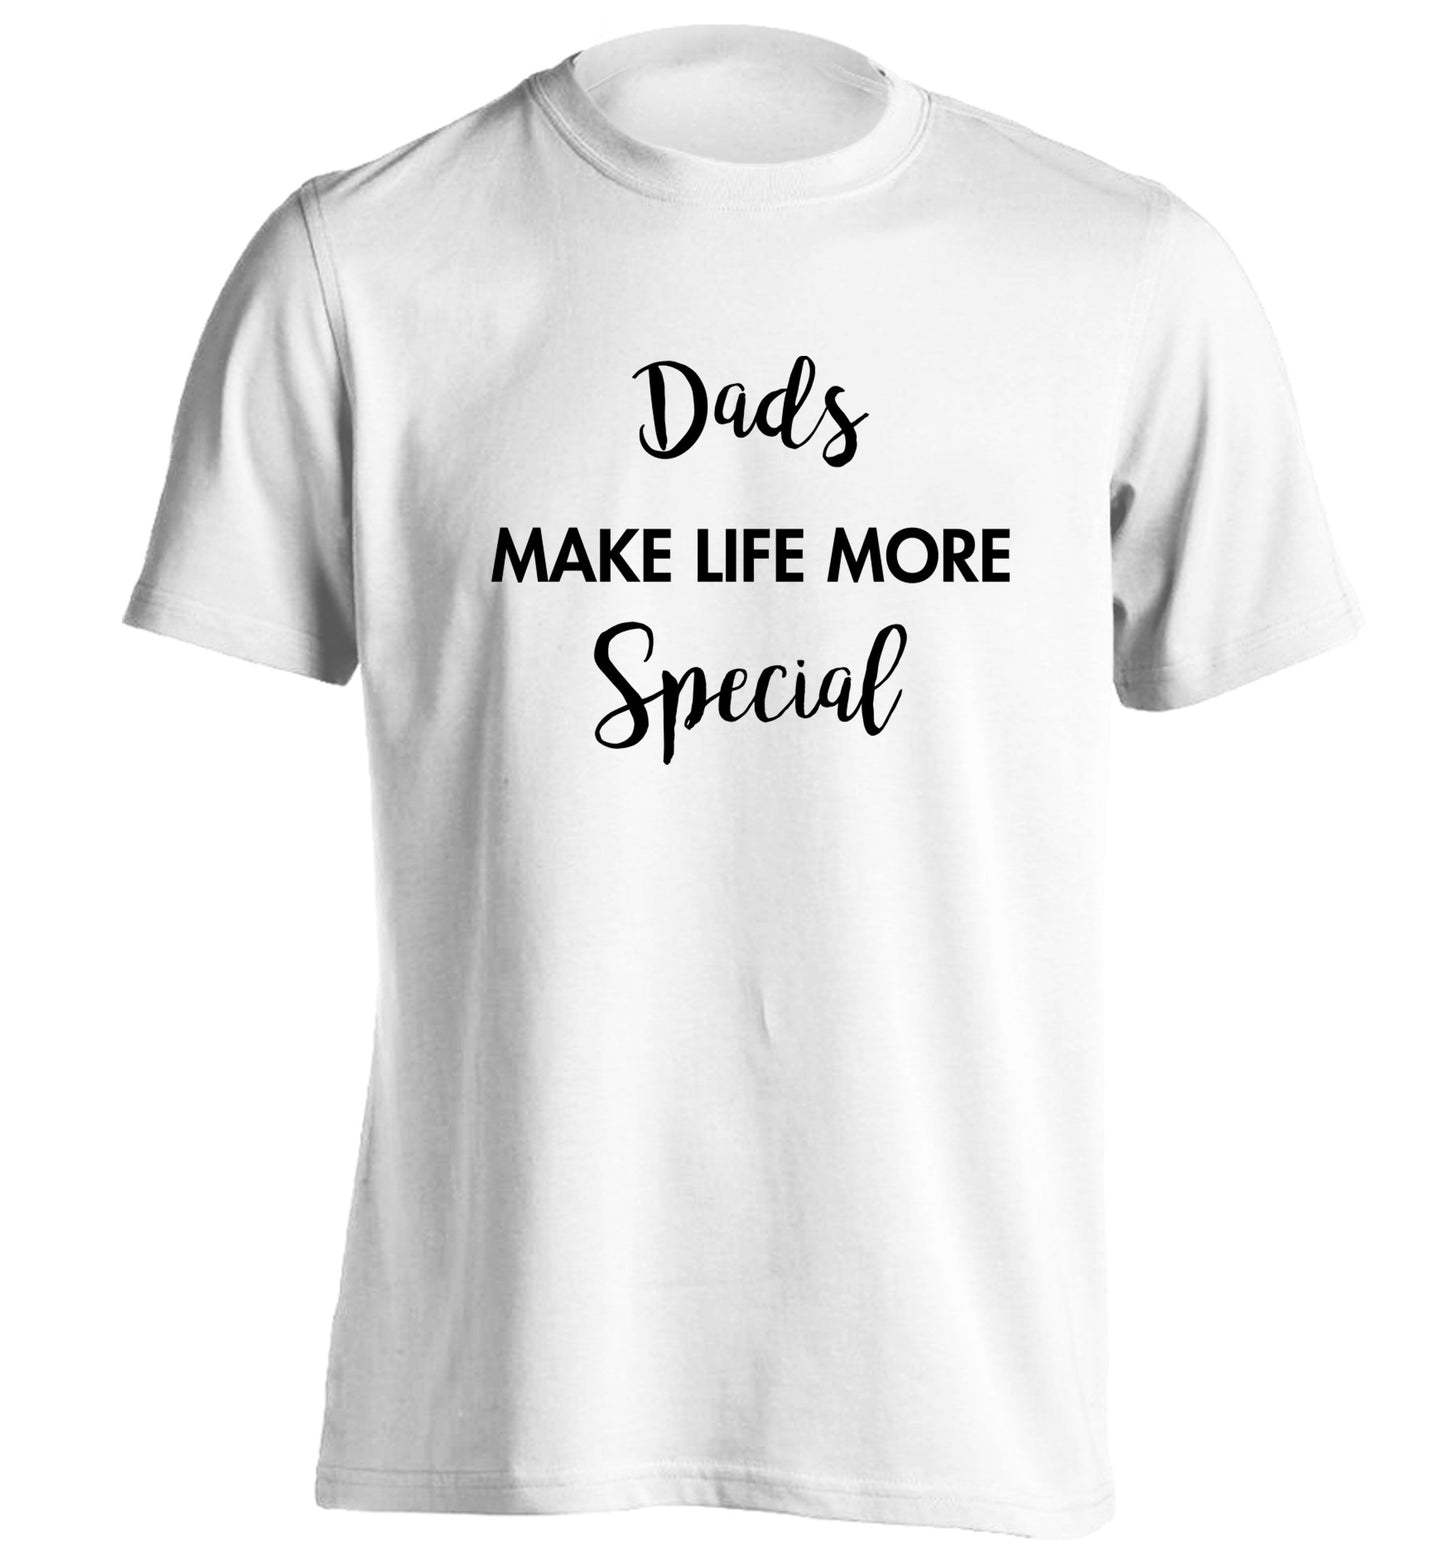 Dads make life more special adults unisex white Tshirt 2XL